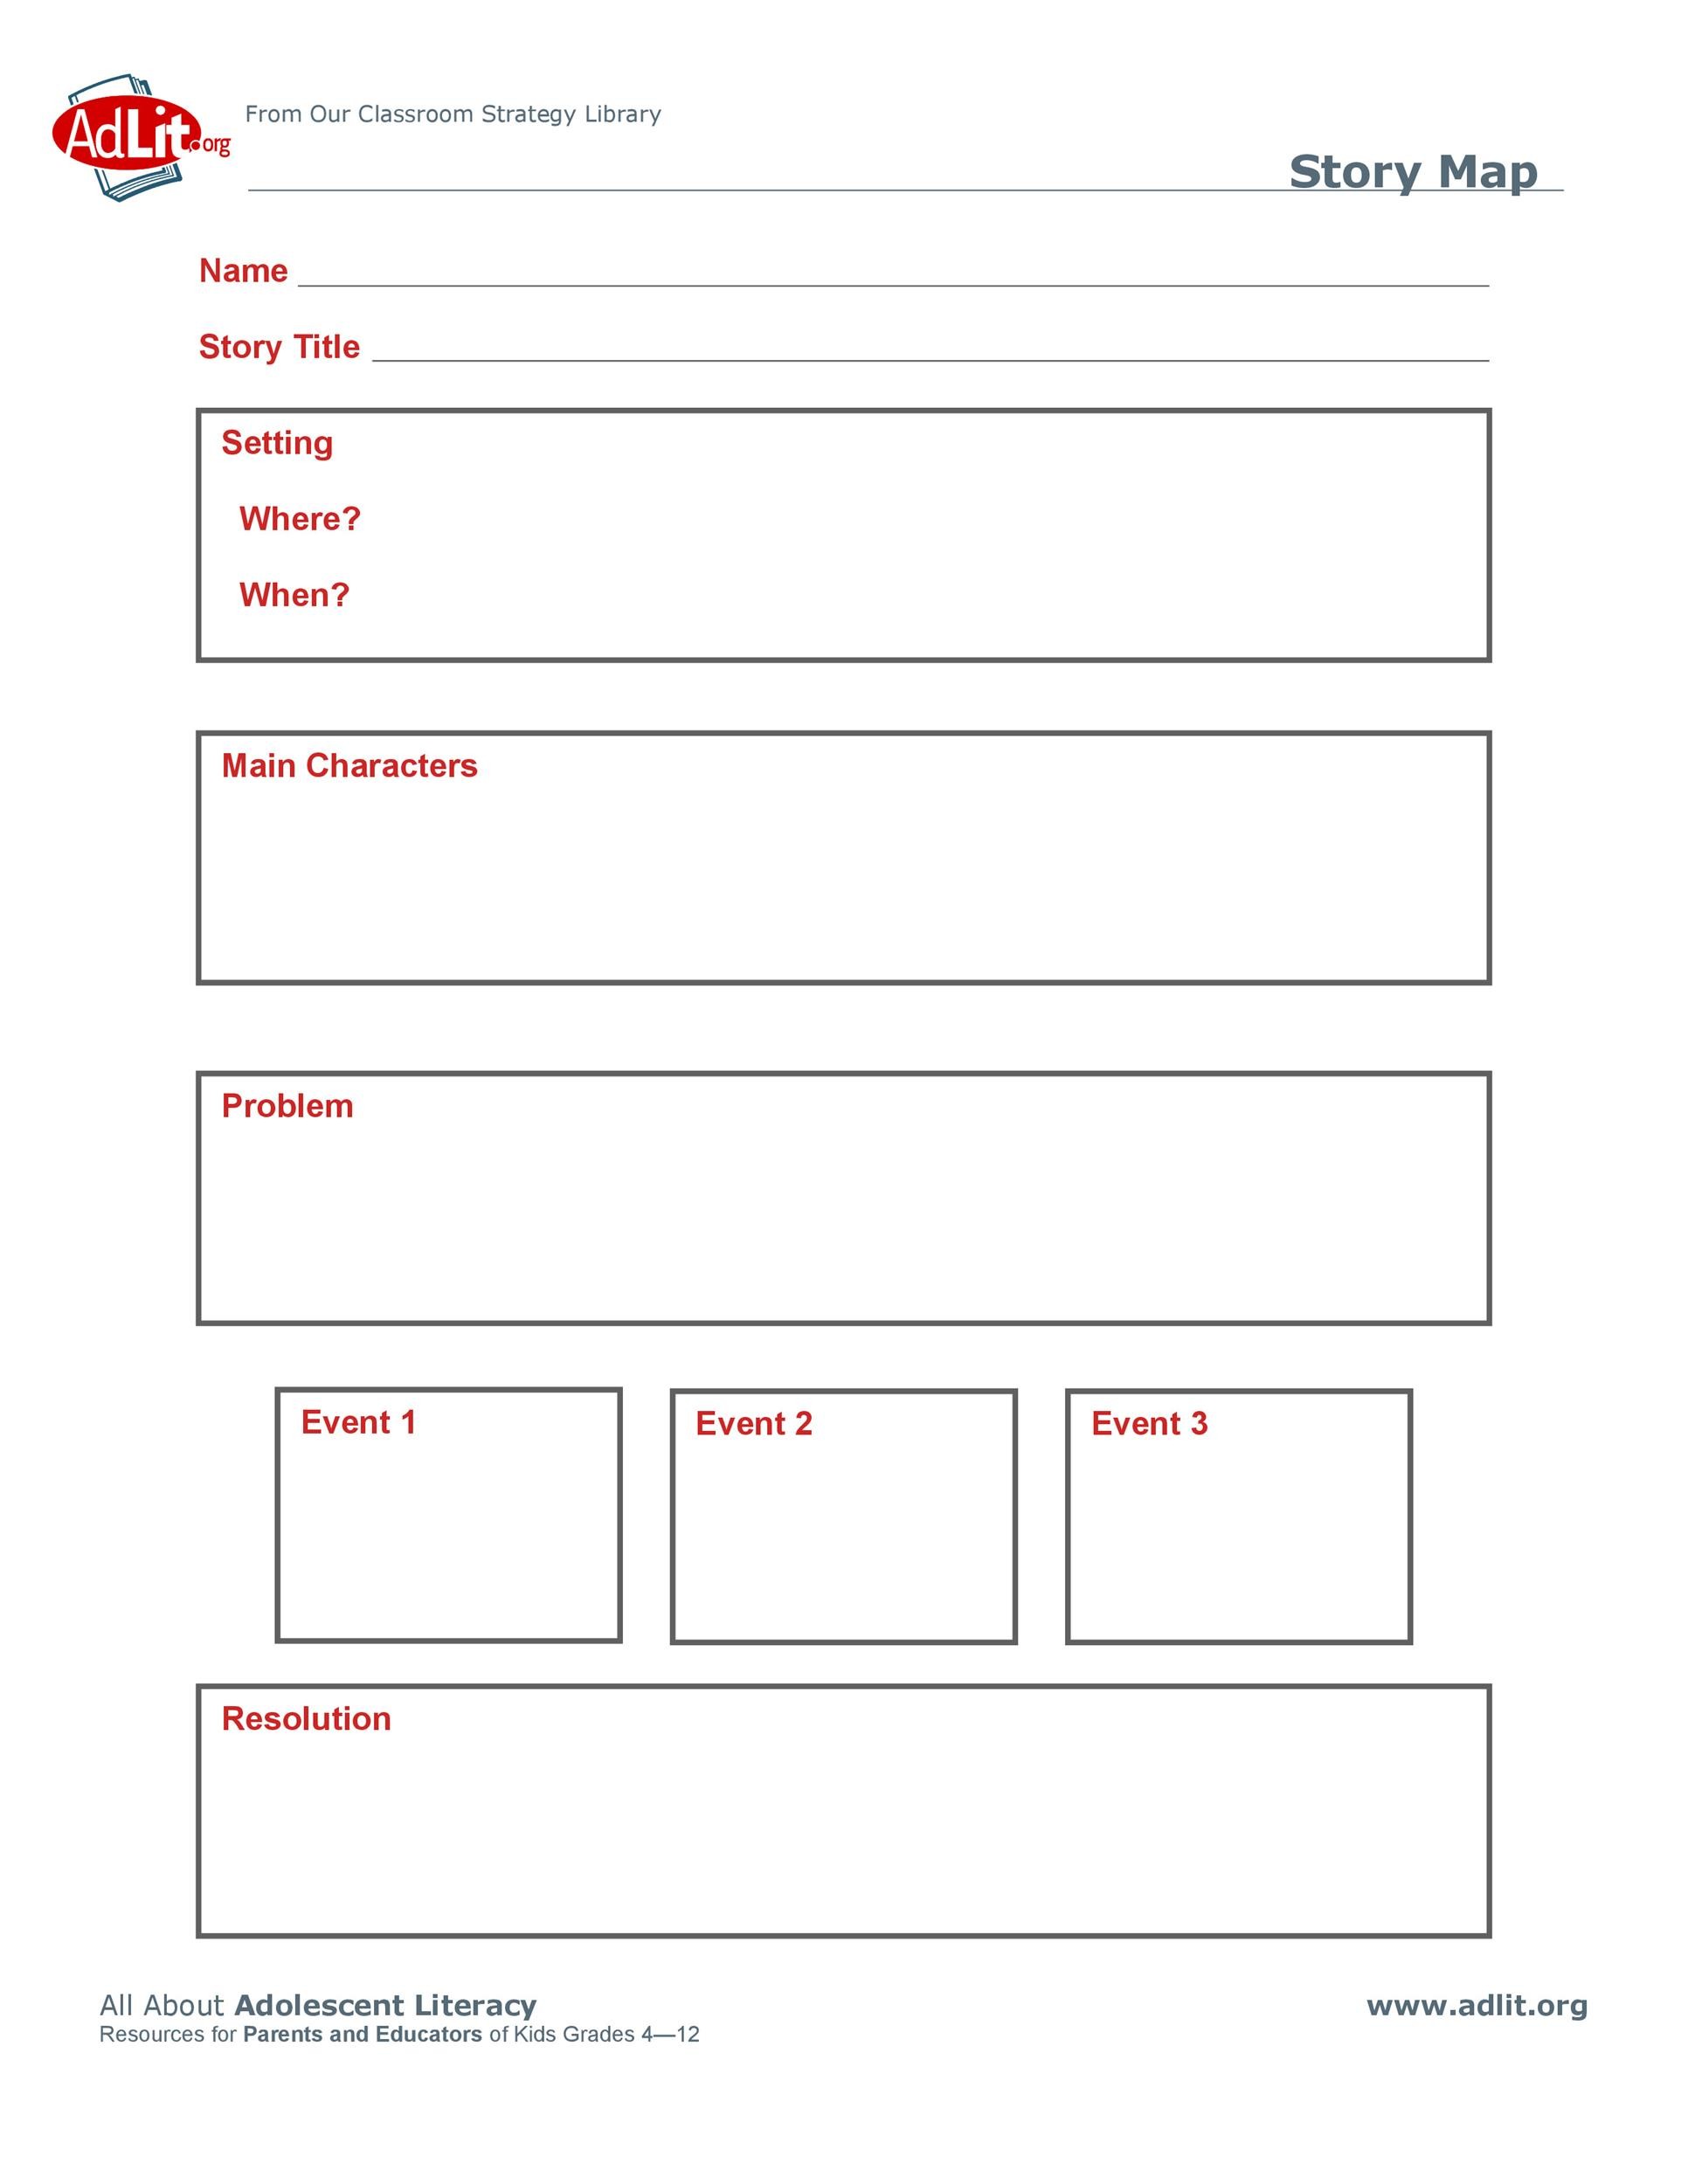 Free story map template 09